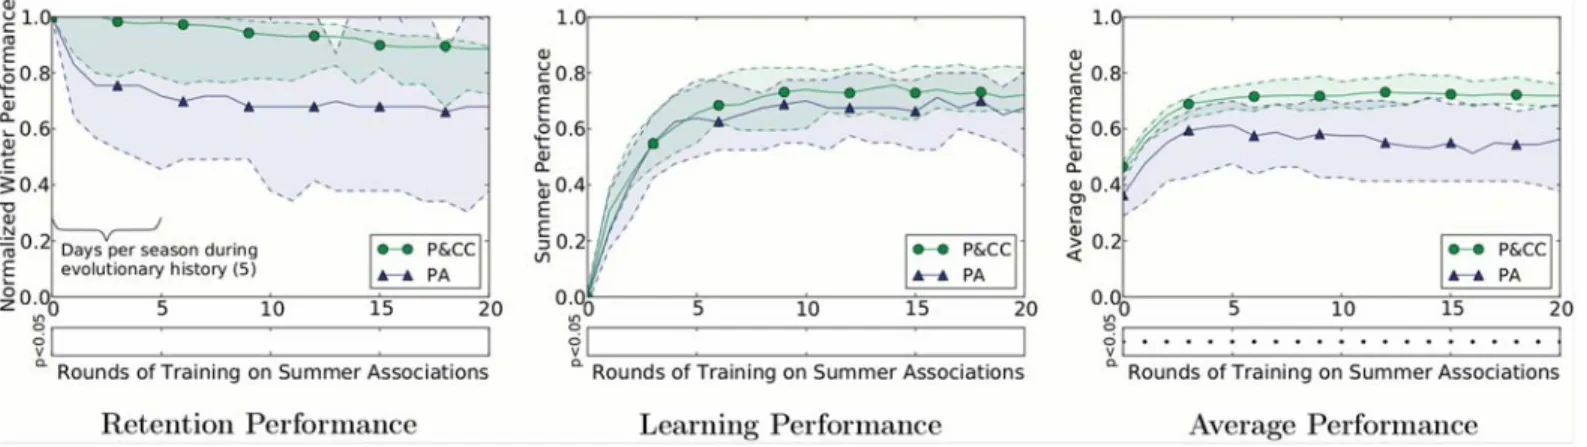 Fig 8. Comparing the retention and forgetting of networks from the two treatments. P&amp;CC networks, which are more modular, are better at retaining associations learned on a previous task (winter associations) while learning a new task (summer associatio